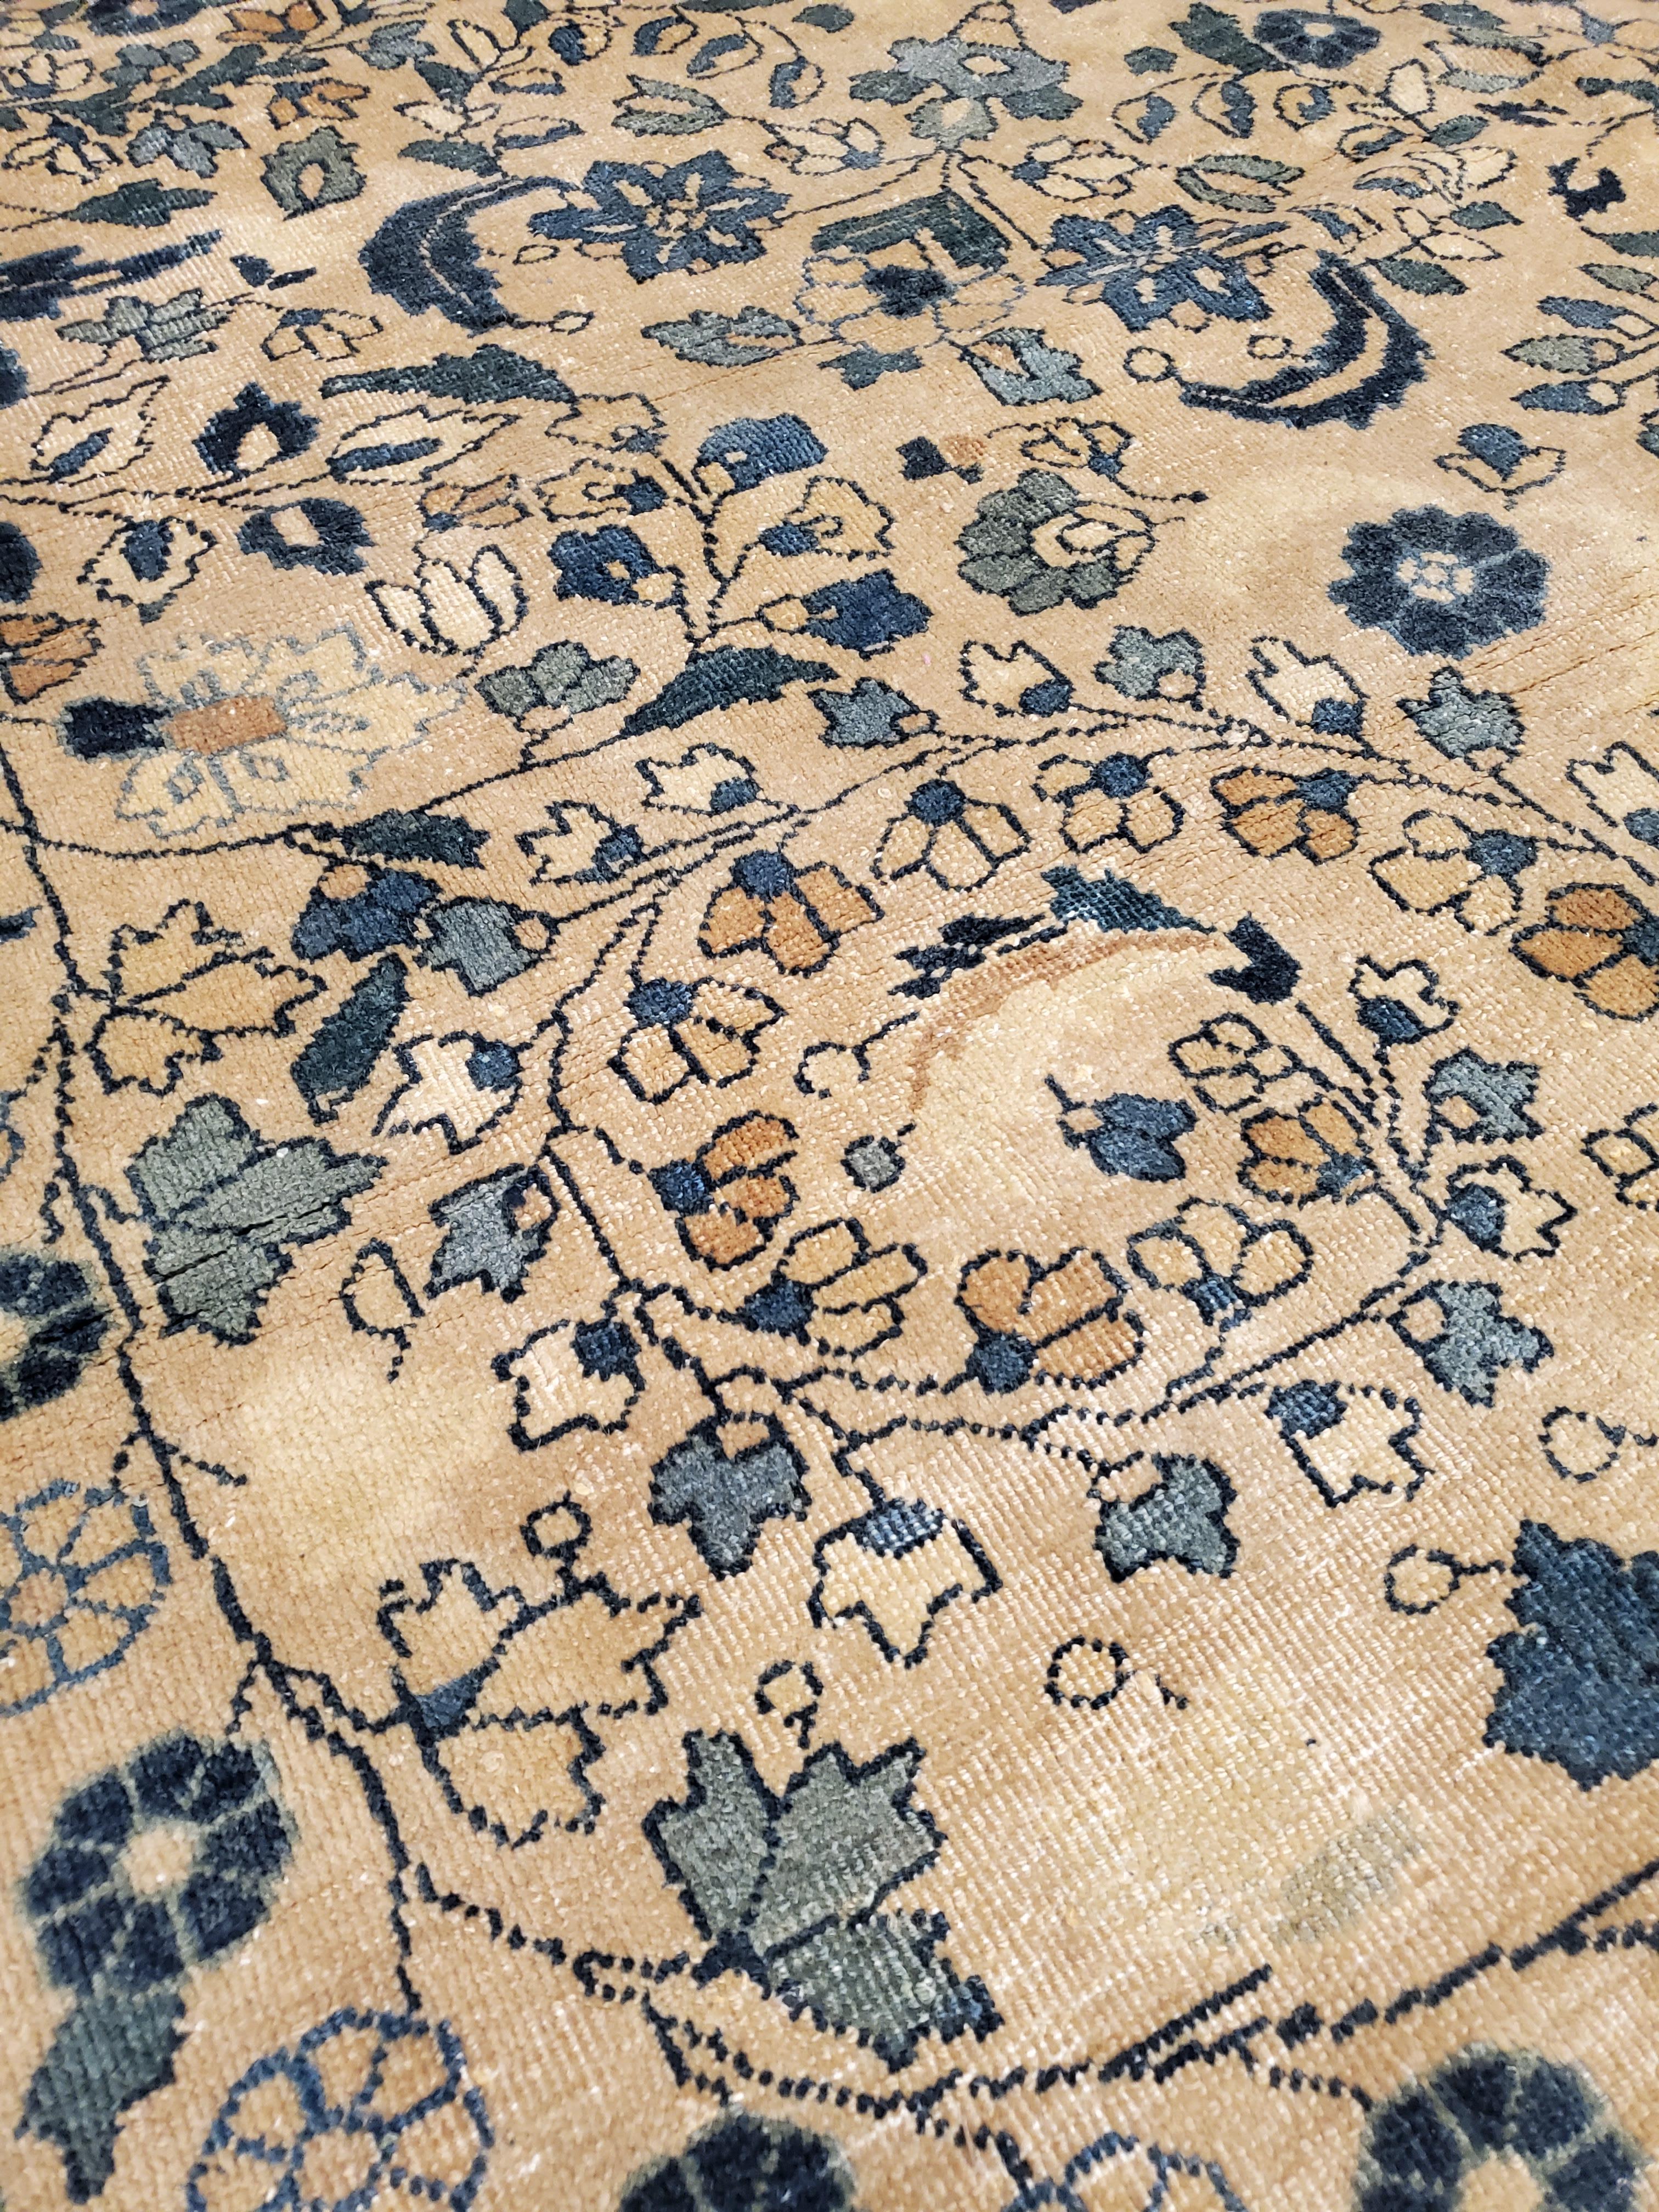 Antique Mashad Persian Carpet, Fine weave, Softs Blues, Beige, Soft Taupe For Sale 1